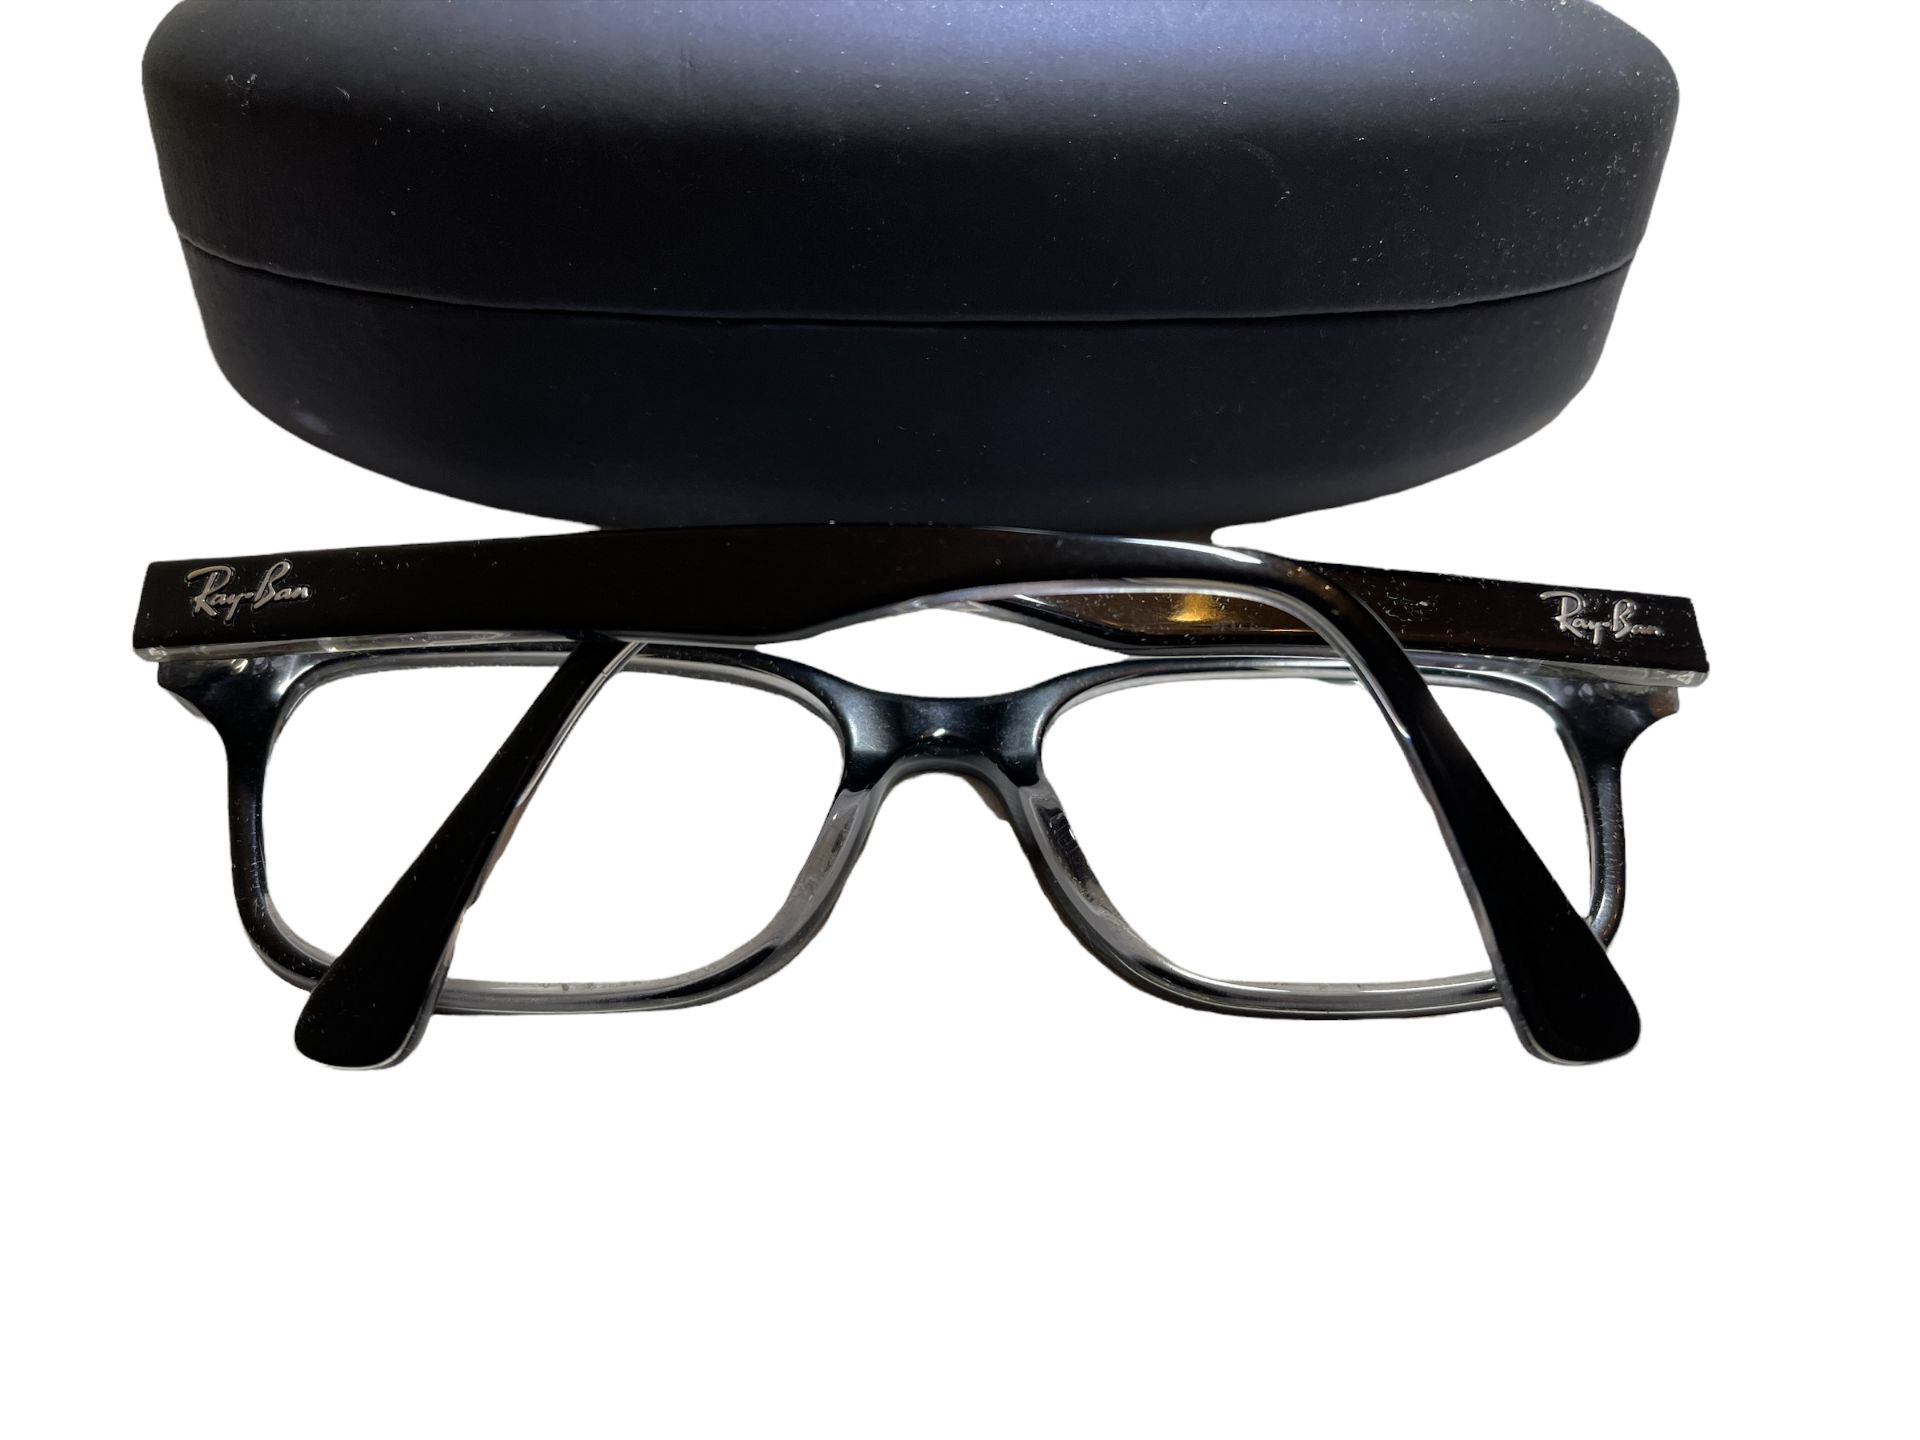 Rayban Spectacle Frames - Surplus Stock from Our Private Jet Charter - Image 4 of 4